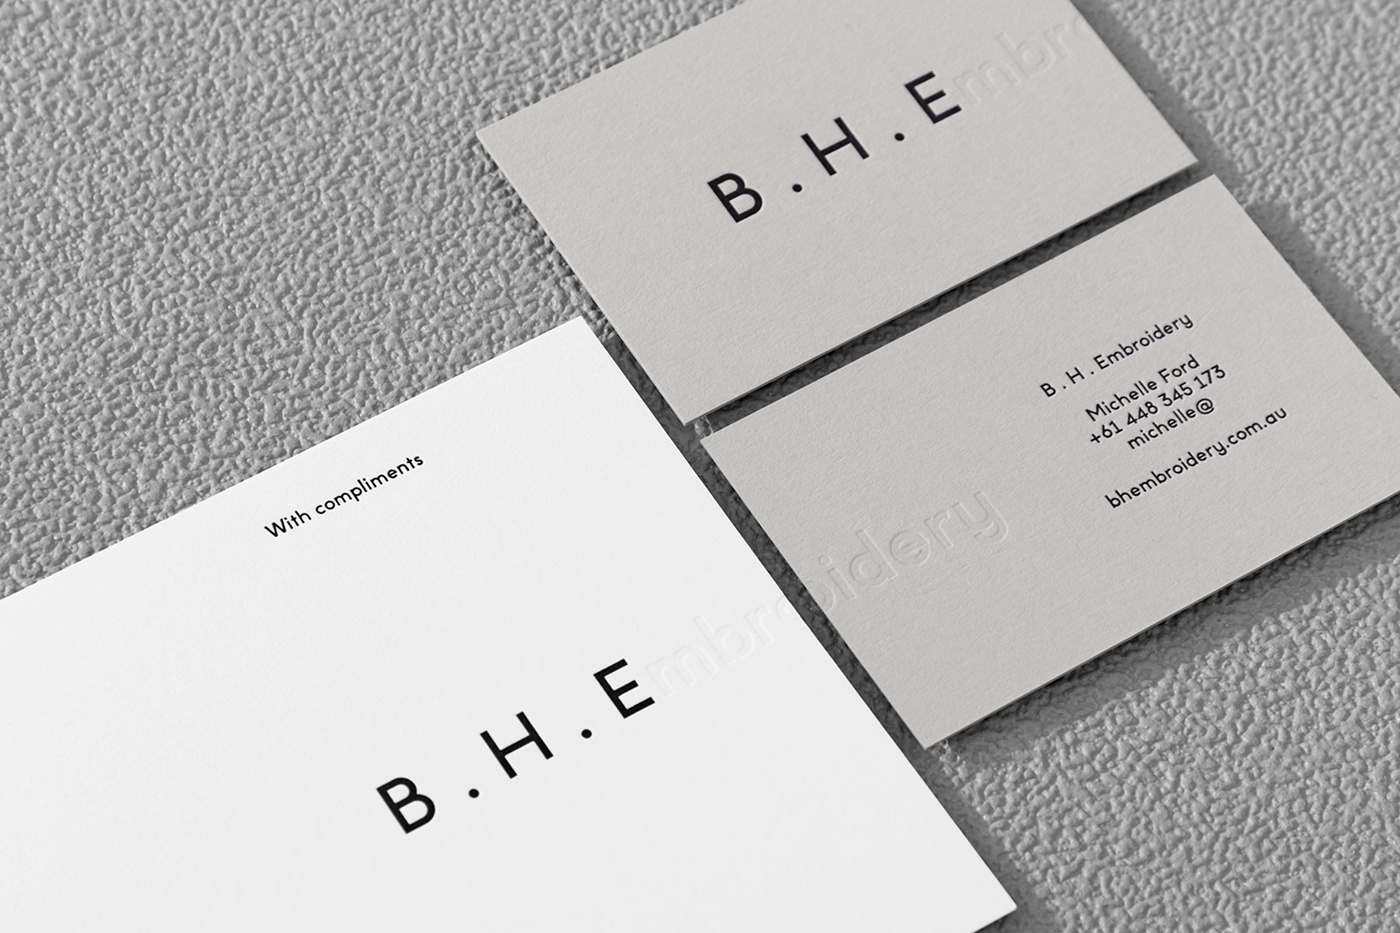 Stationery letterpress colorplan black and white grey business card letterhead With Compliments Slip emboss